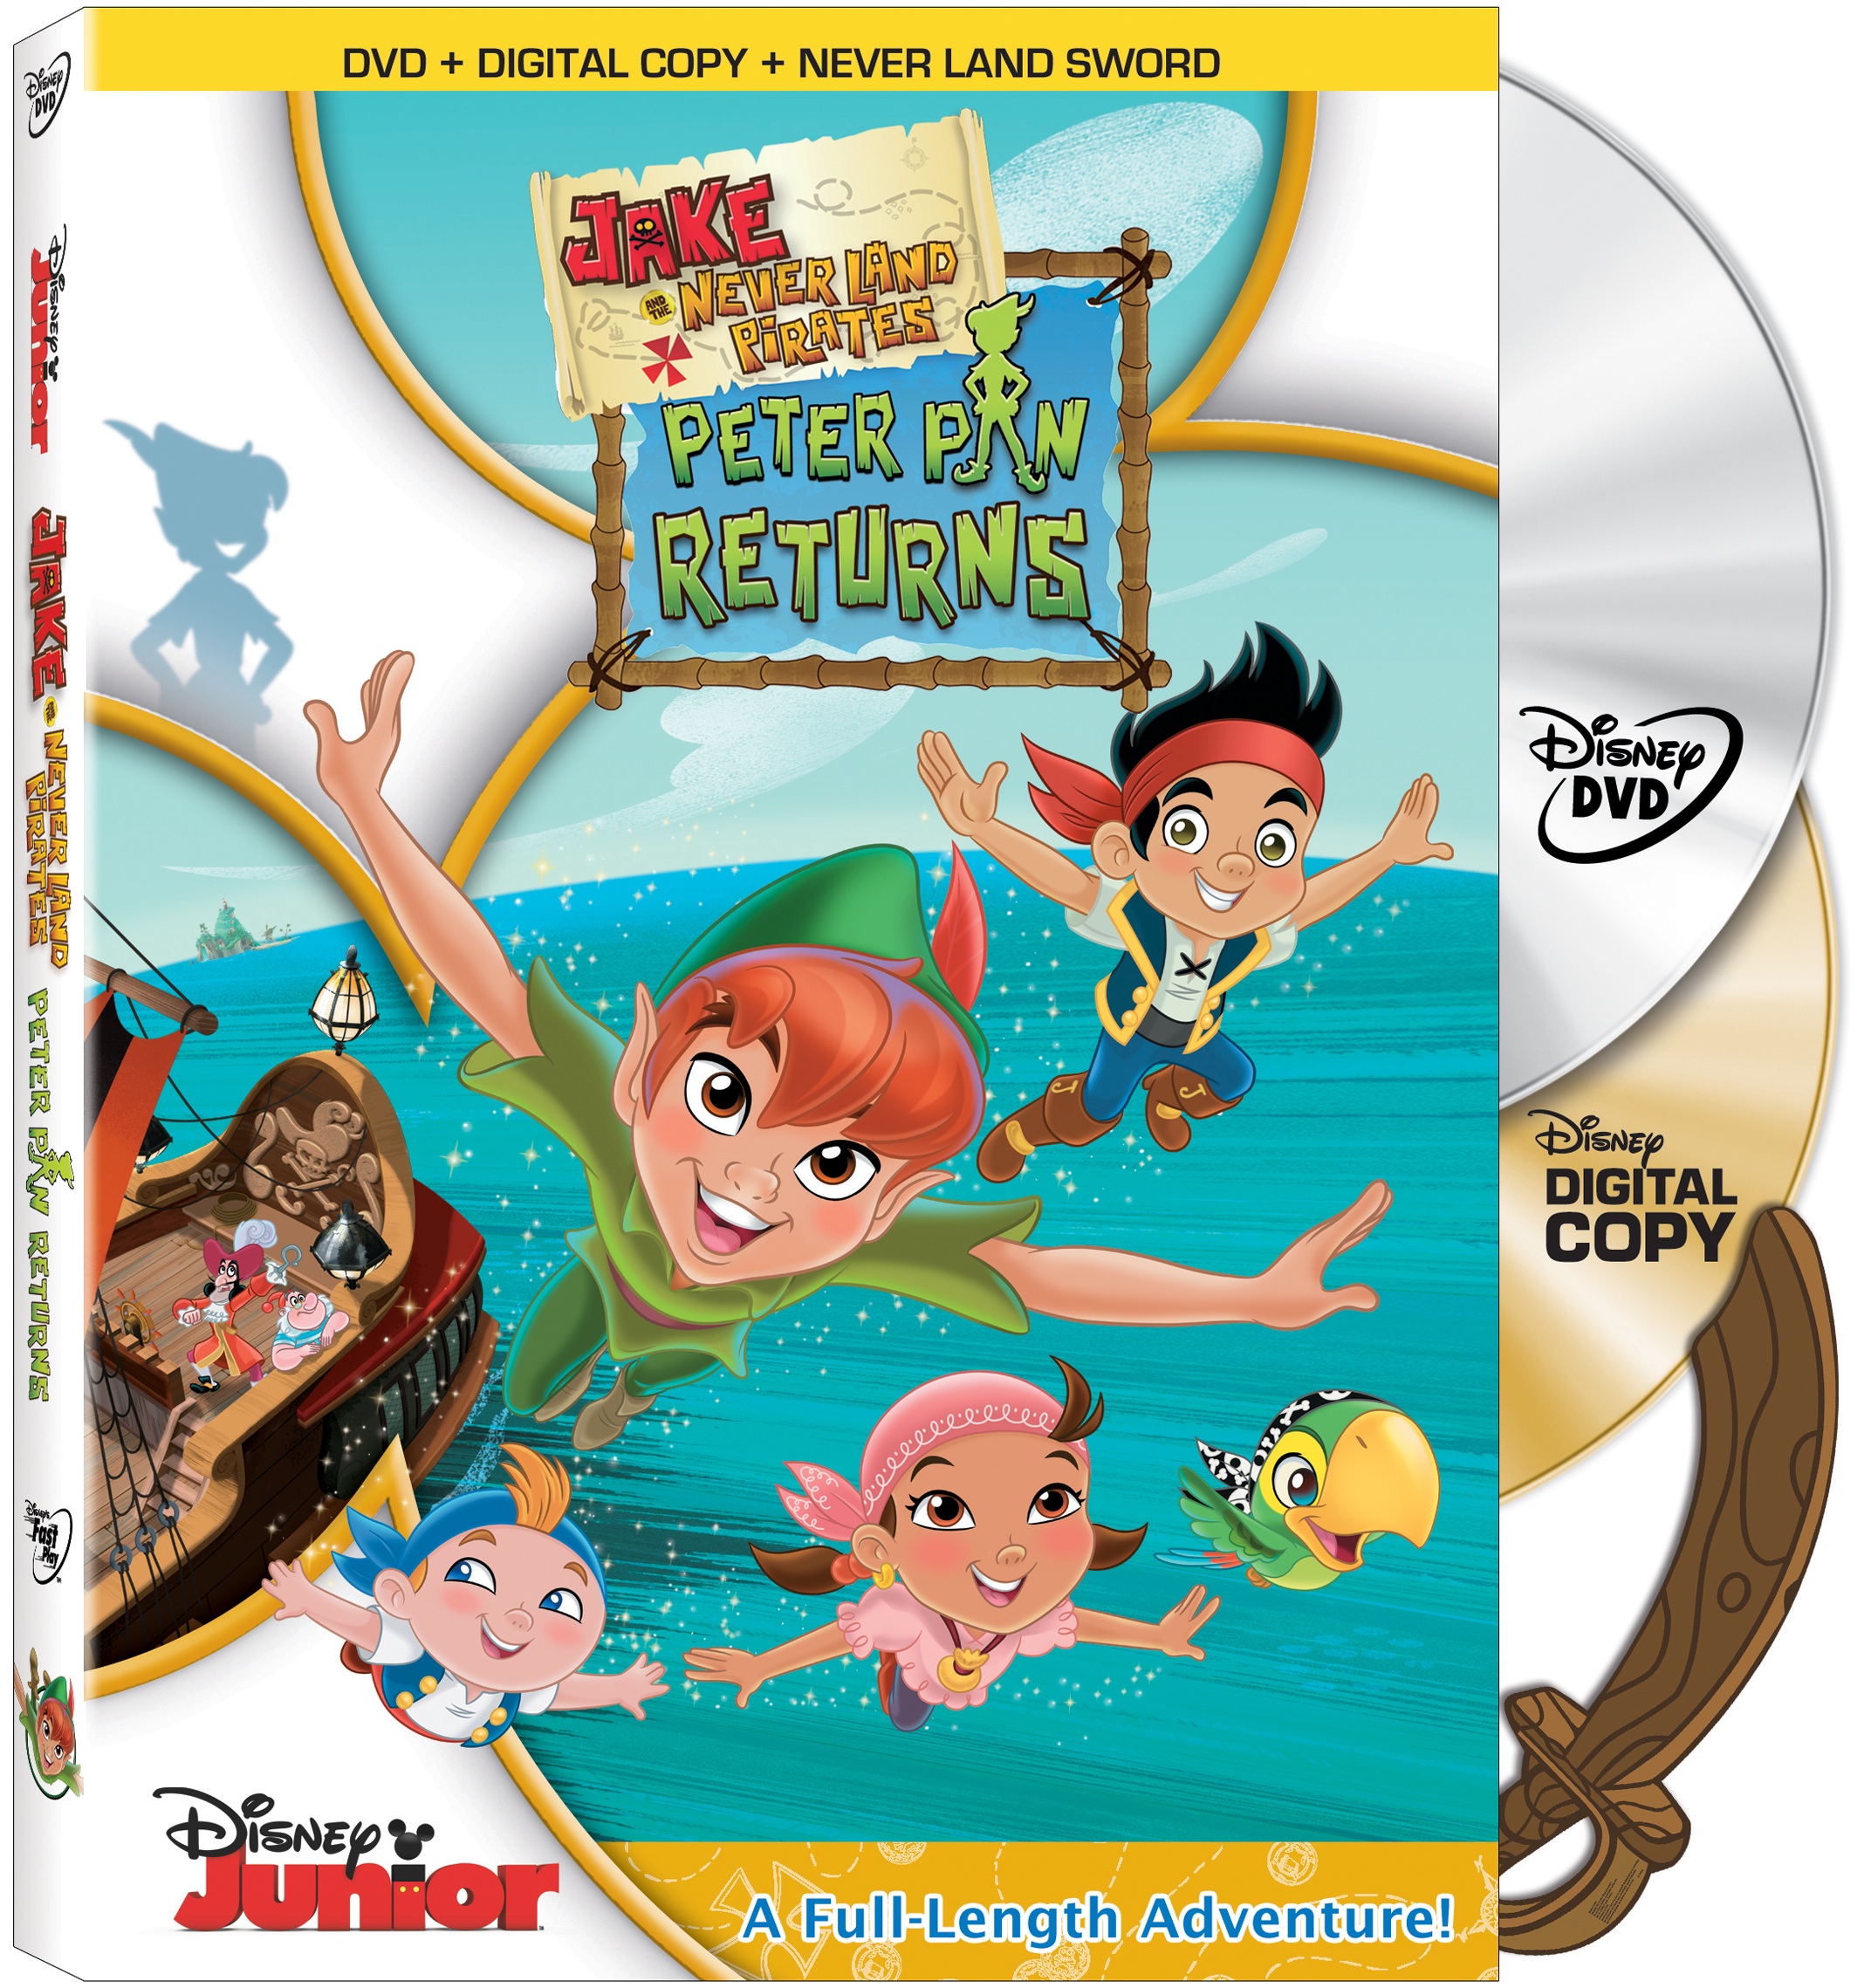 Jake and the Never Land Pirates: Peter Pan Returns To Be Released on